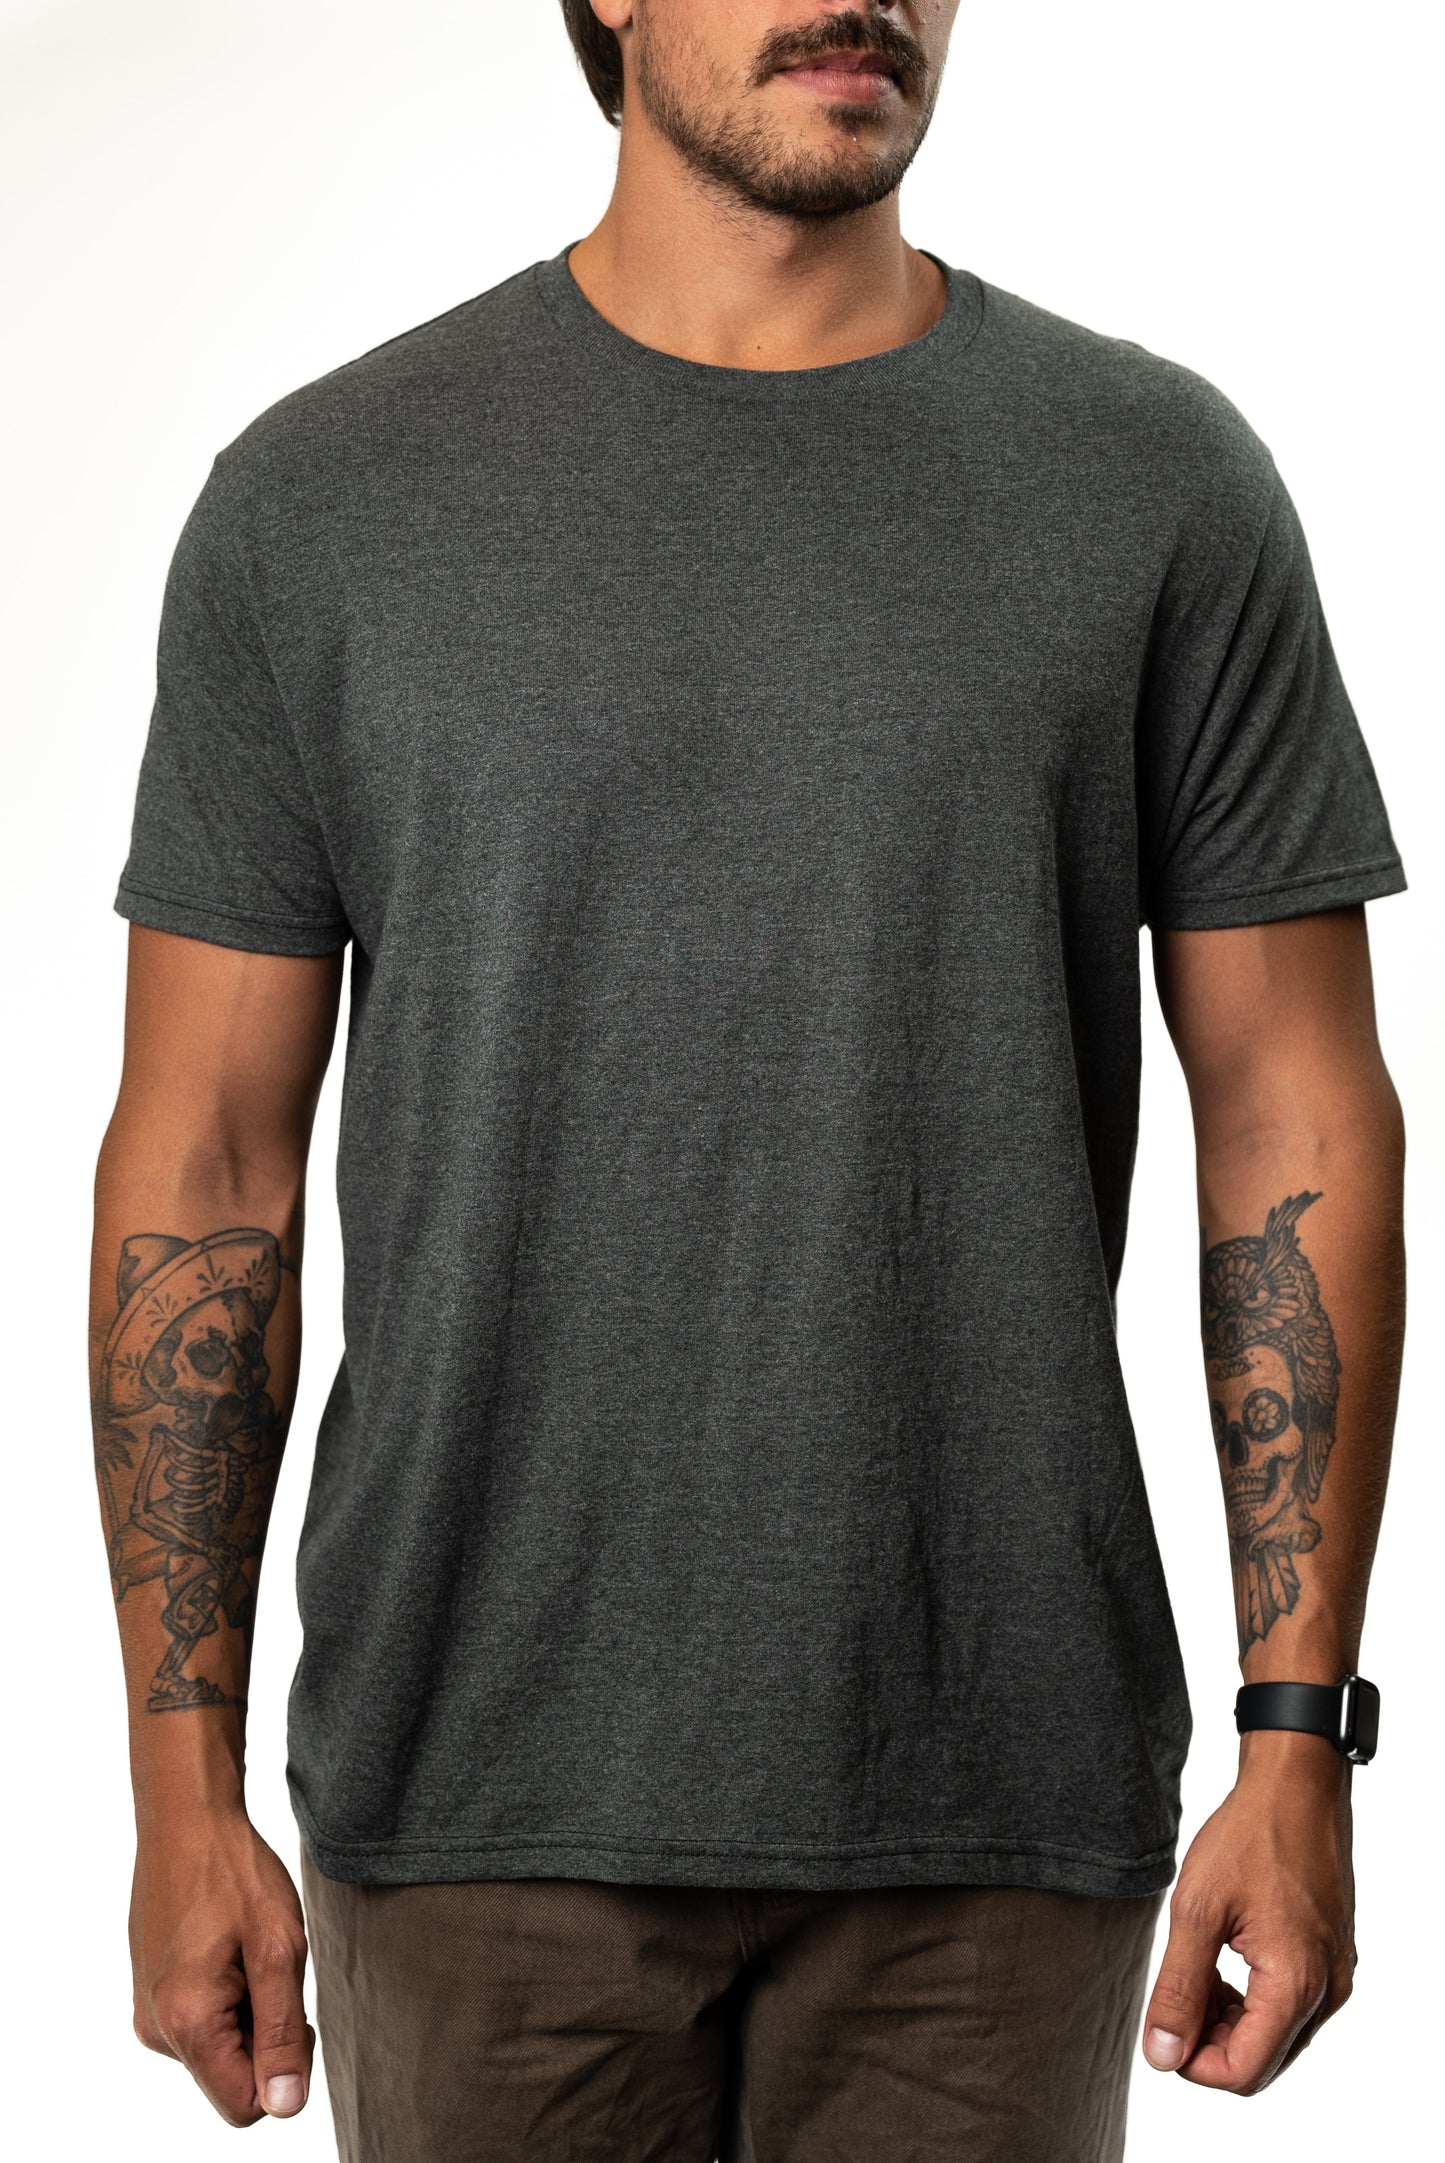 47208 - Sustainable Tee Charcoal Heather / XS T SHIRT